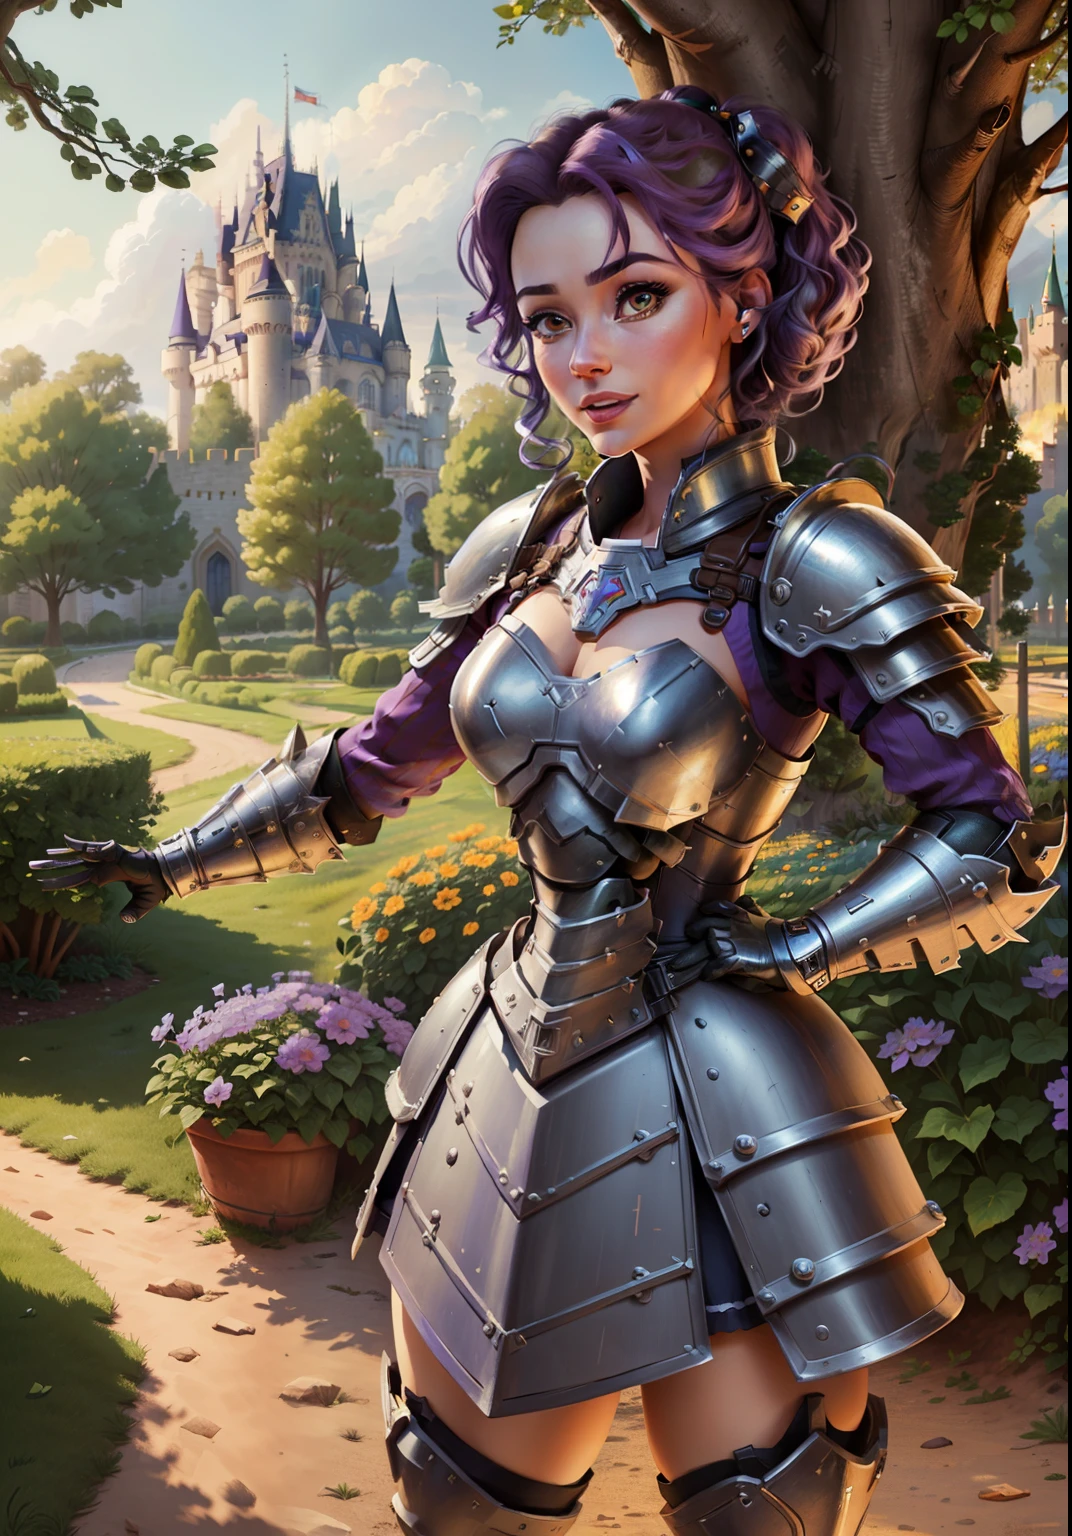 (BelleWaifu:1), (knight's armor:0.3), the garden in the background, surprised, cute, cute pose, (flirting), looking at the viewer, (square hairstyle), (purple hair), (red skirt:0.7), (An armored lifter on a body:1.5), (open arms:1), :D, (realistic: 1), (cartoon), (masterpiece: 1.2), (best quality), (over-detailed), (8k, 4k, intricate), (full-length shot: 1), (cowboy shot: 1.2), (85mm), light particles, lighting, (very detailed: 1.2), (detailed face: 1), (gradients), sfw, colorful, (detailed eyes: 1.2), (detailed landscape, trees, garden, castle:1.2),(detailed background), detailed landscape, (dynamic angle:1.2), (dynamic pose:1.2), (rule third_composition:1.3), (line of action:1.2), wide view, daylight, solo
